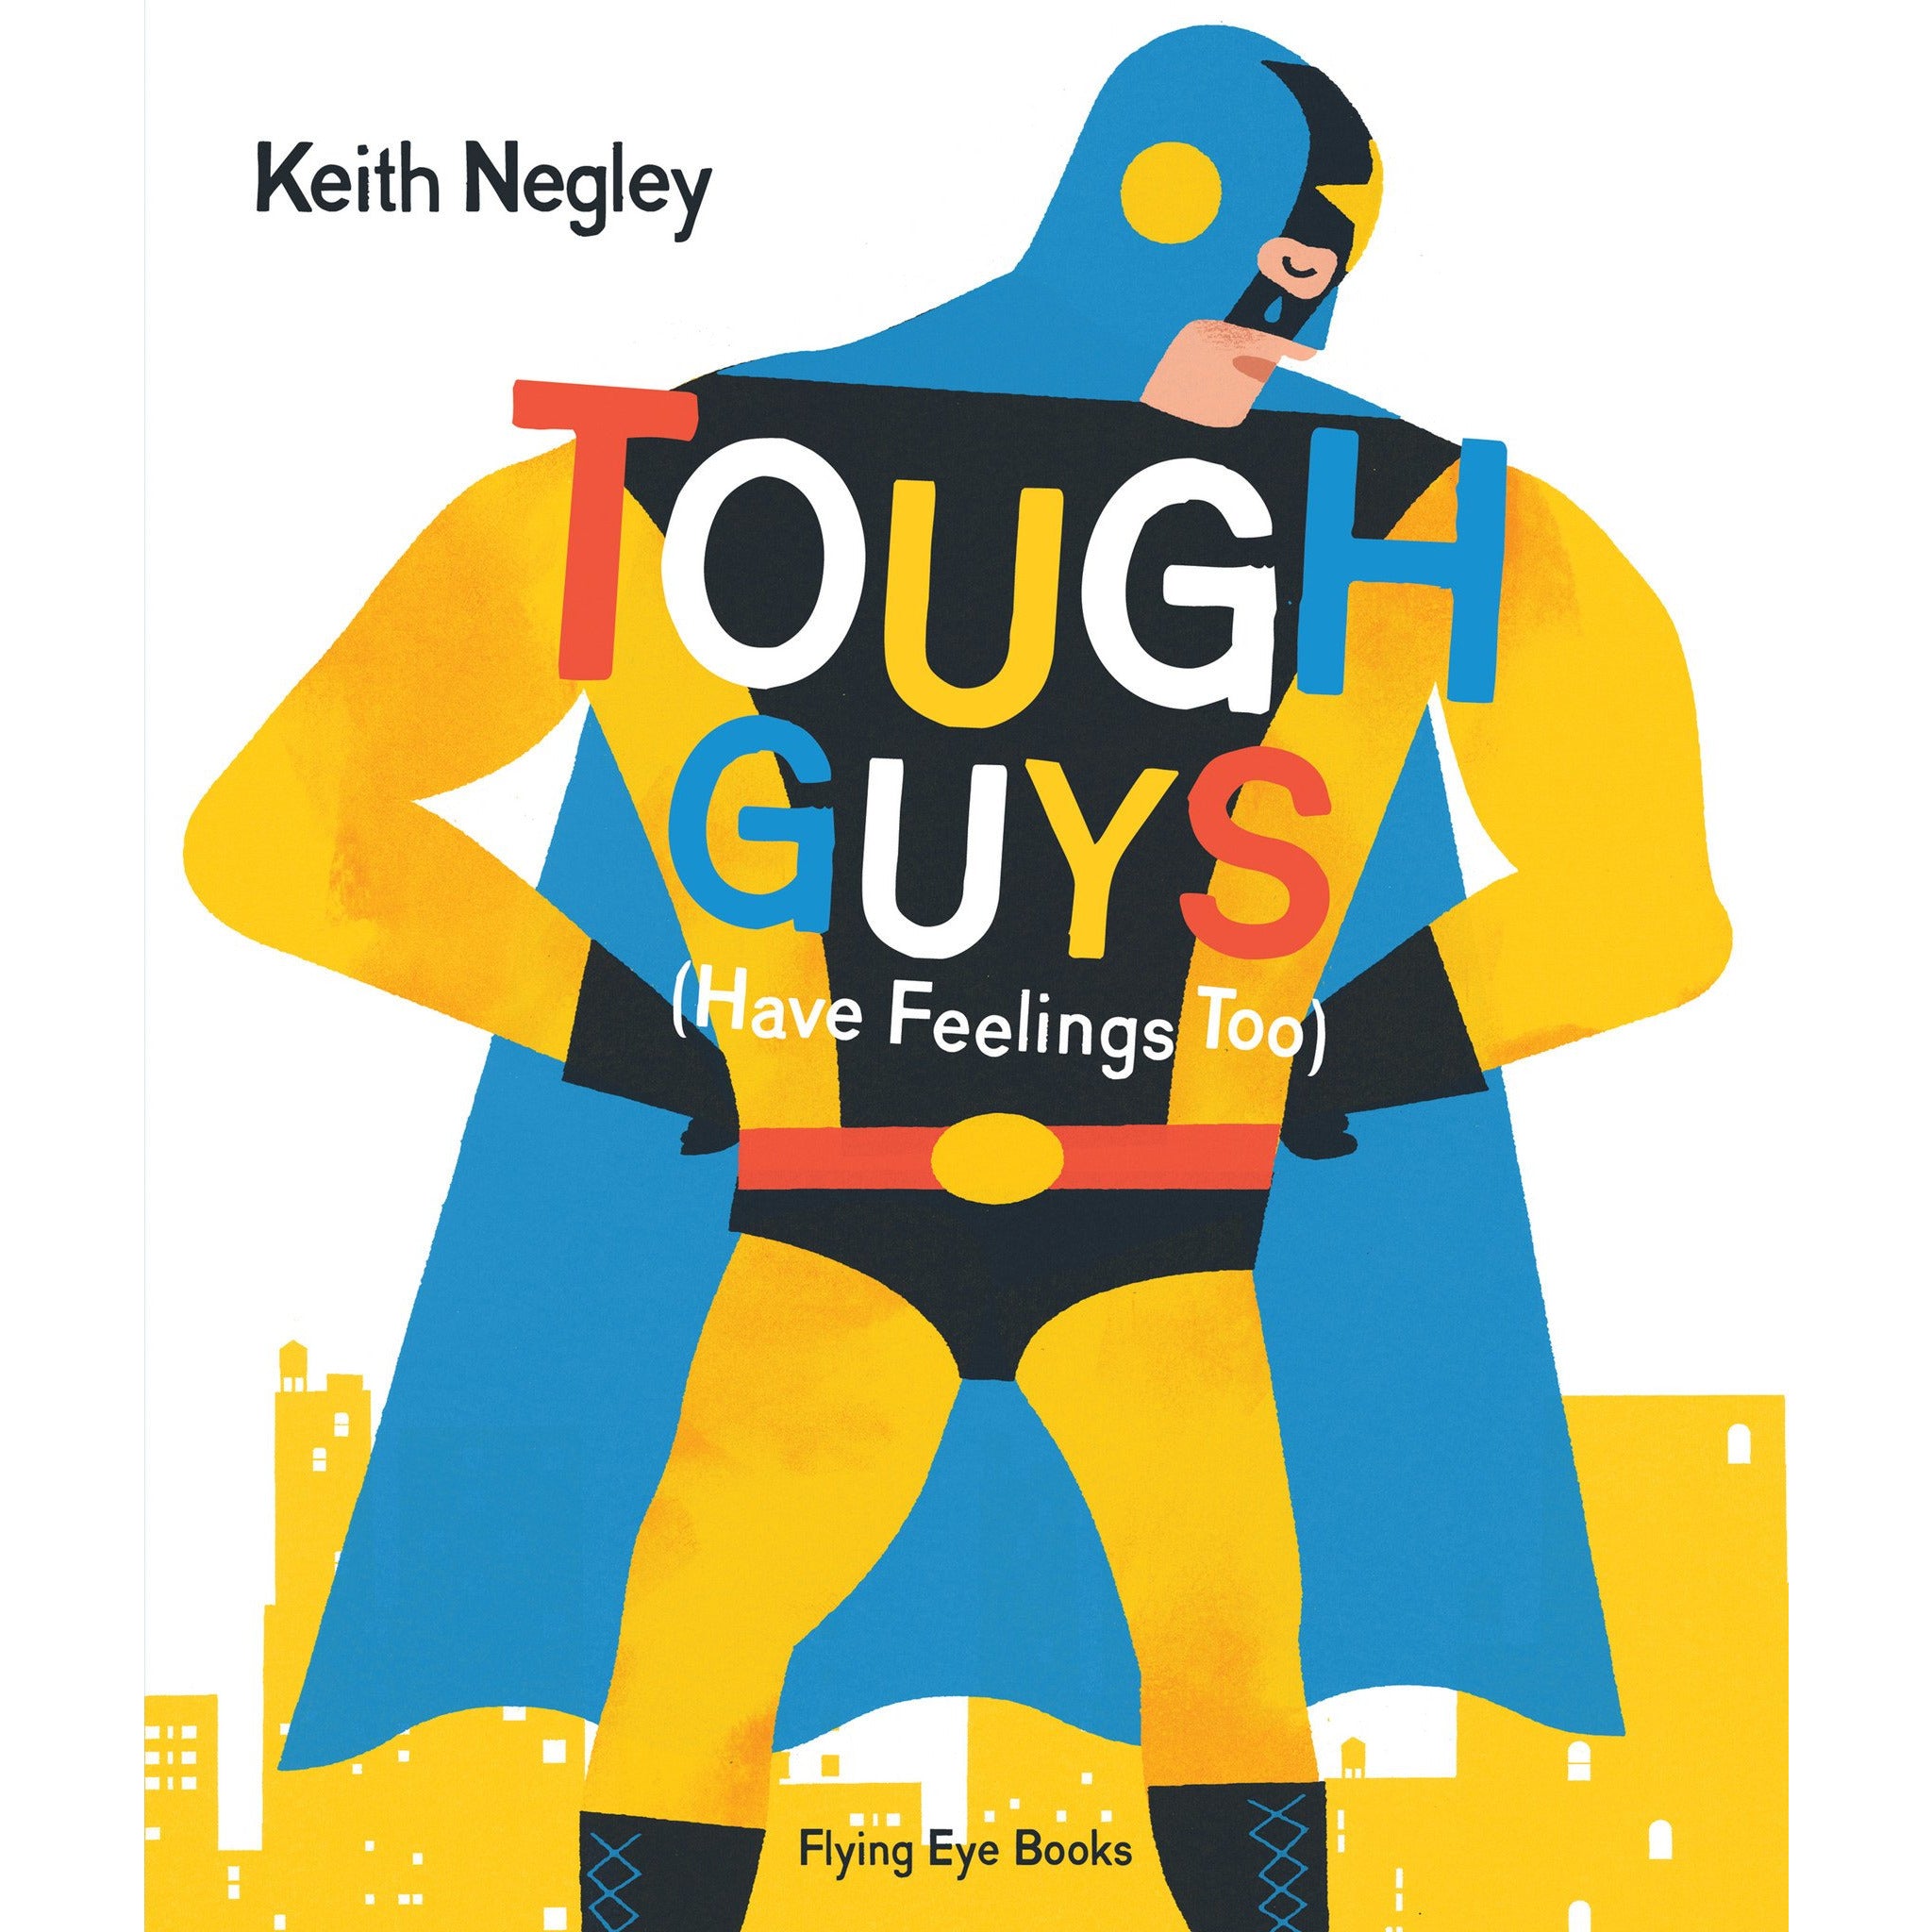 Tough Guys (They Have Feelings Too) - Keith Negley